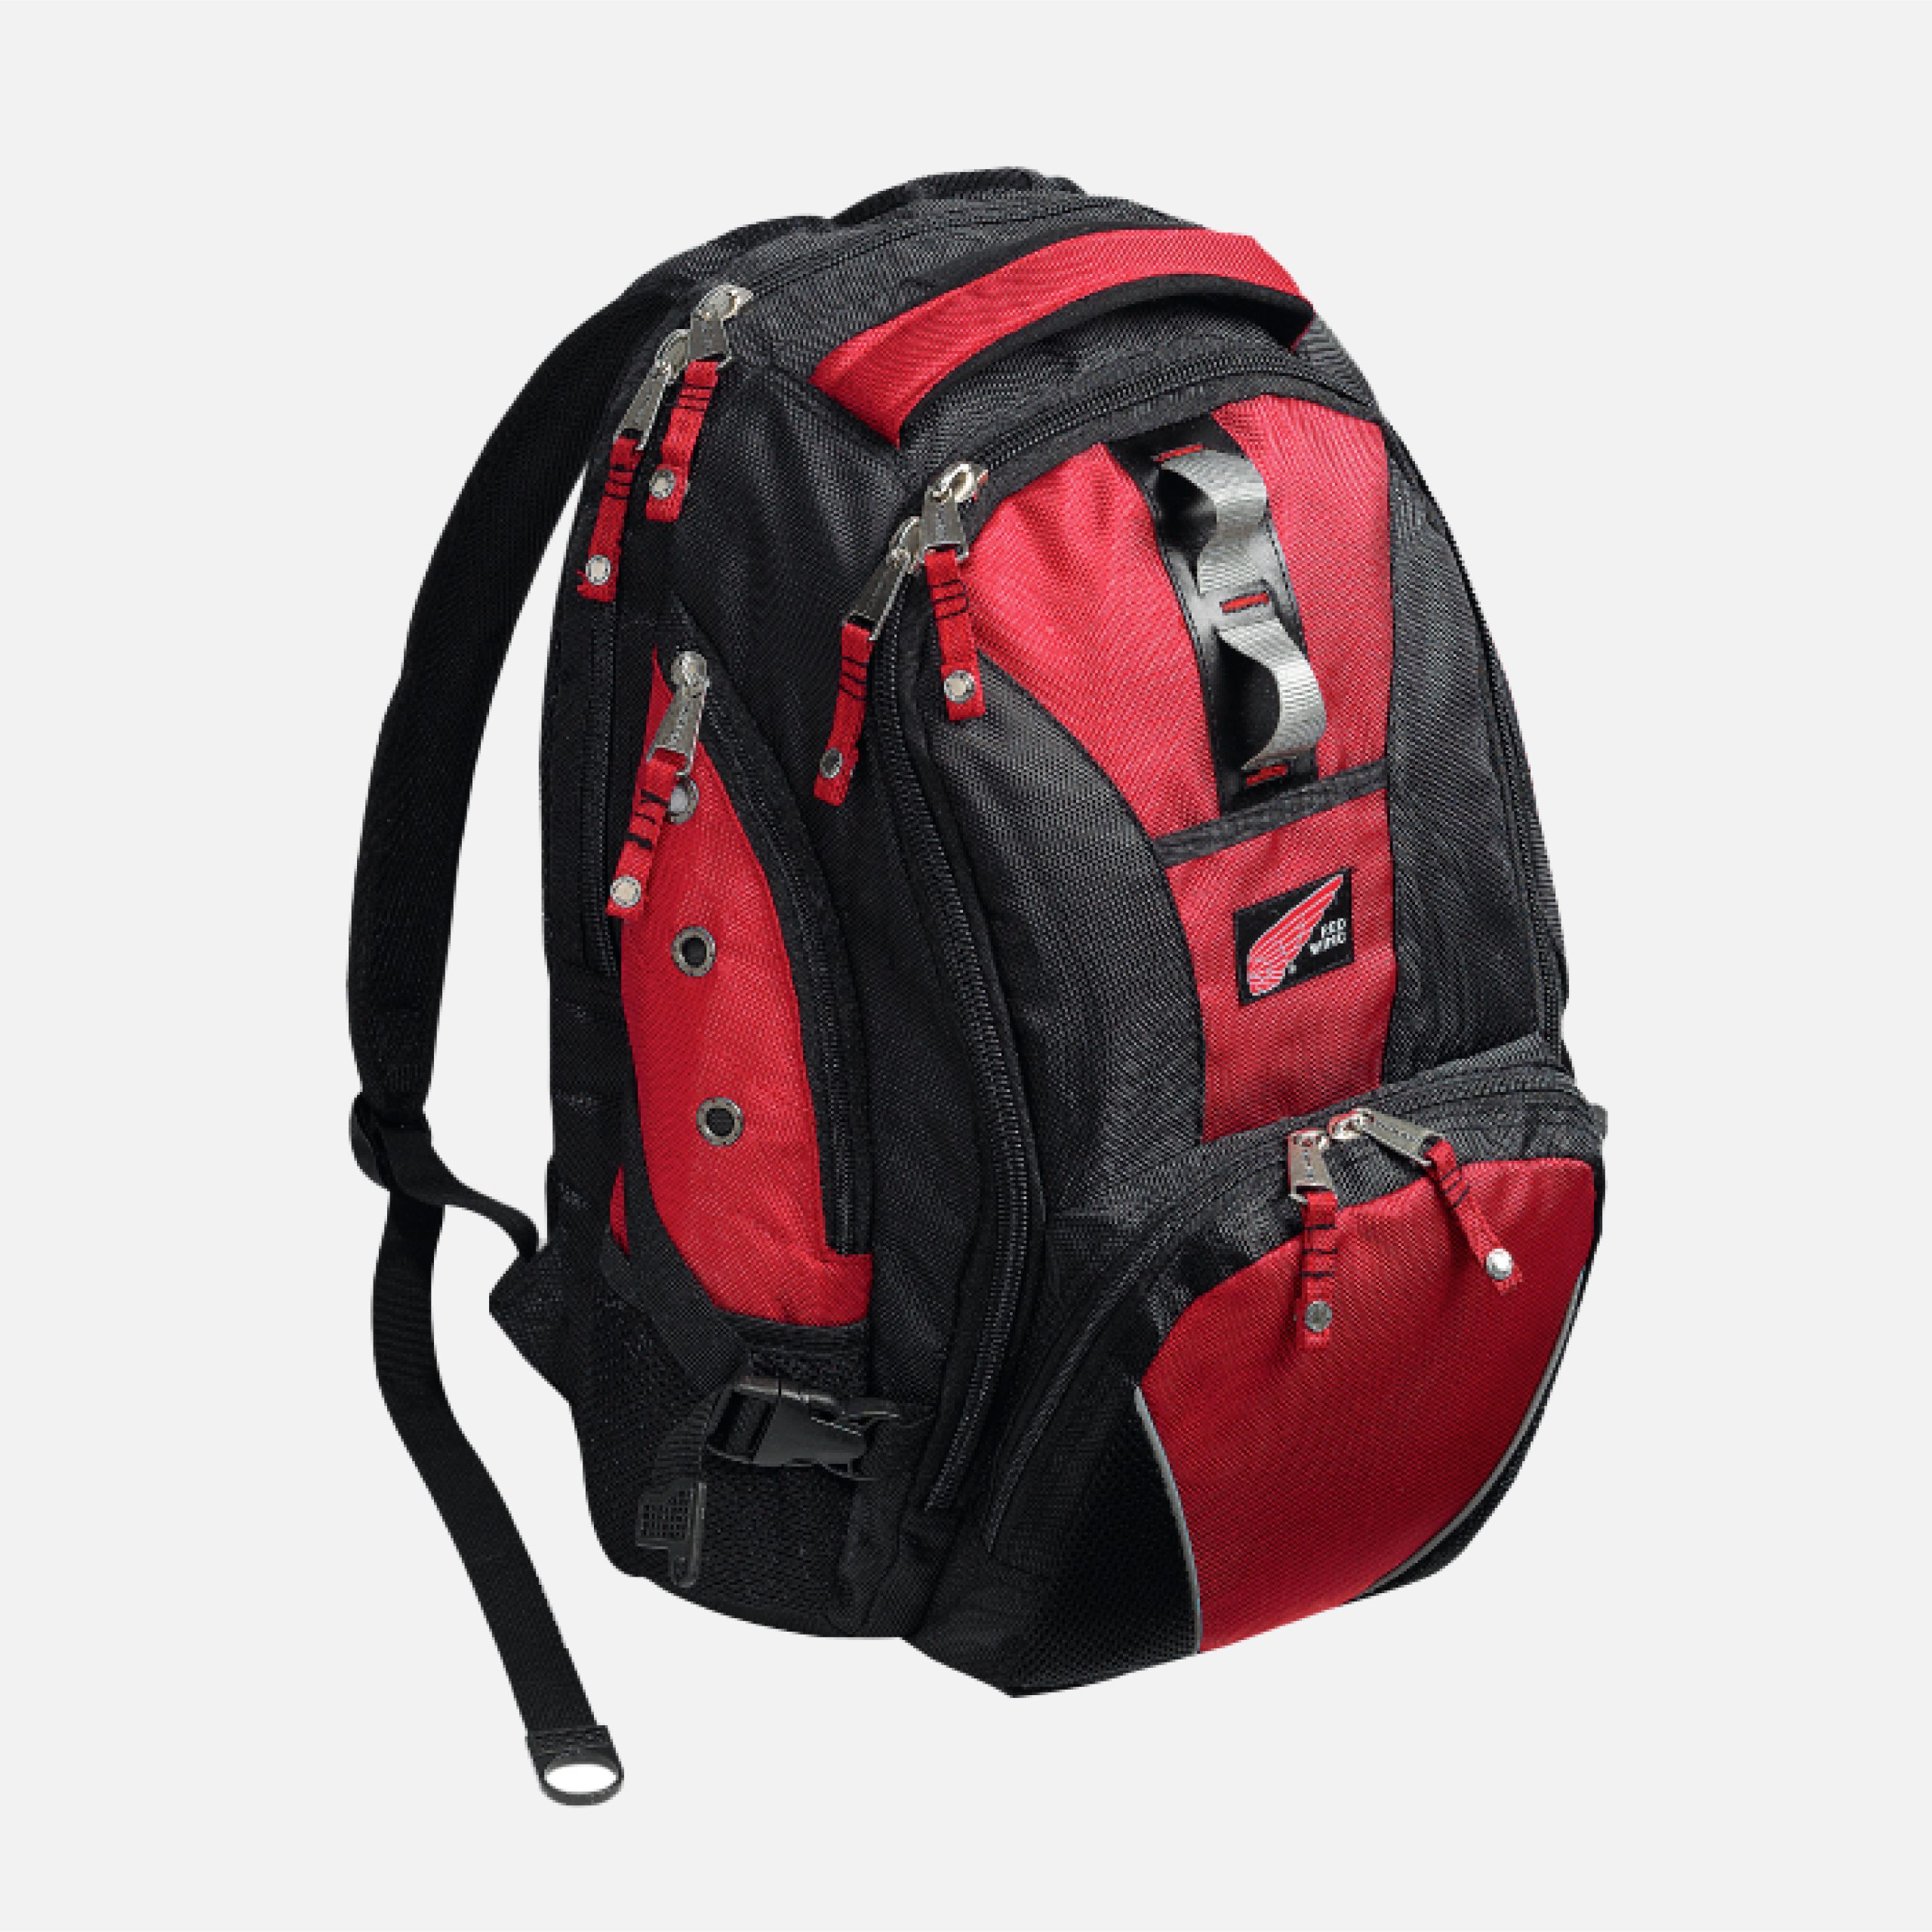 RED WING 69012-62 RED/BLACK BACK PACK - The Leeden Store